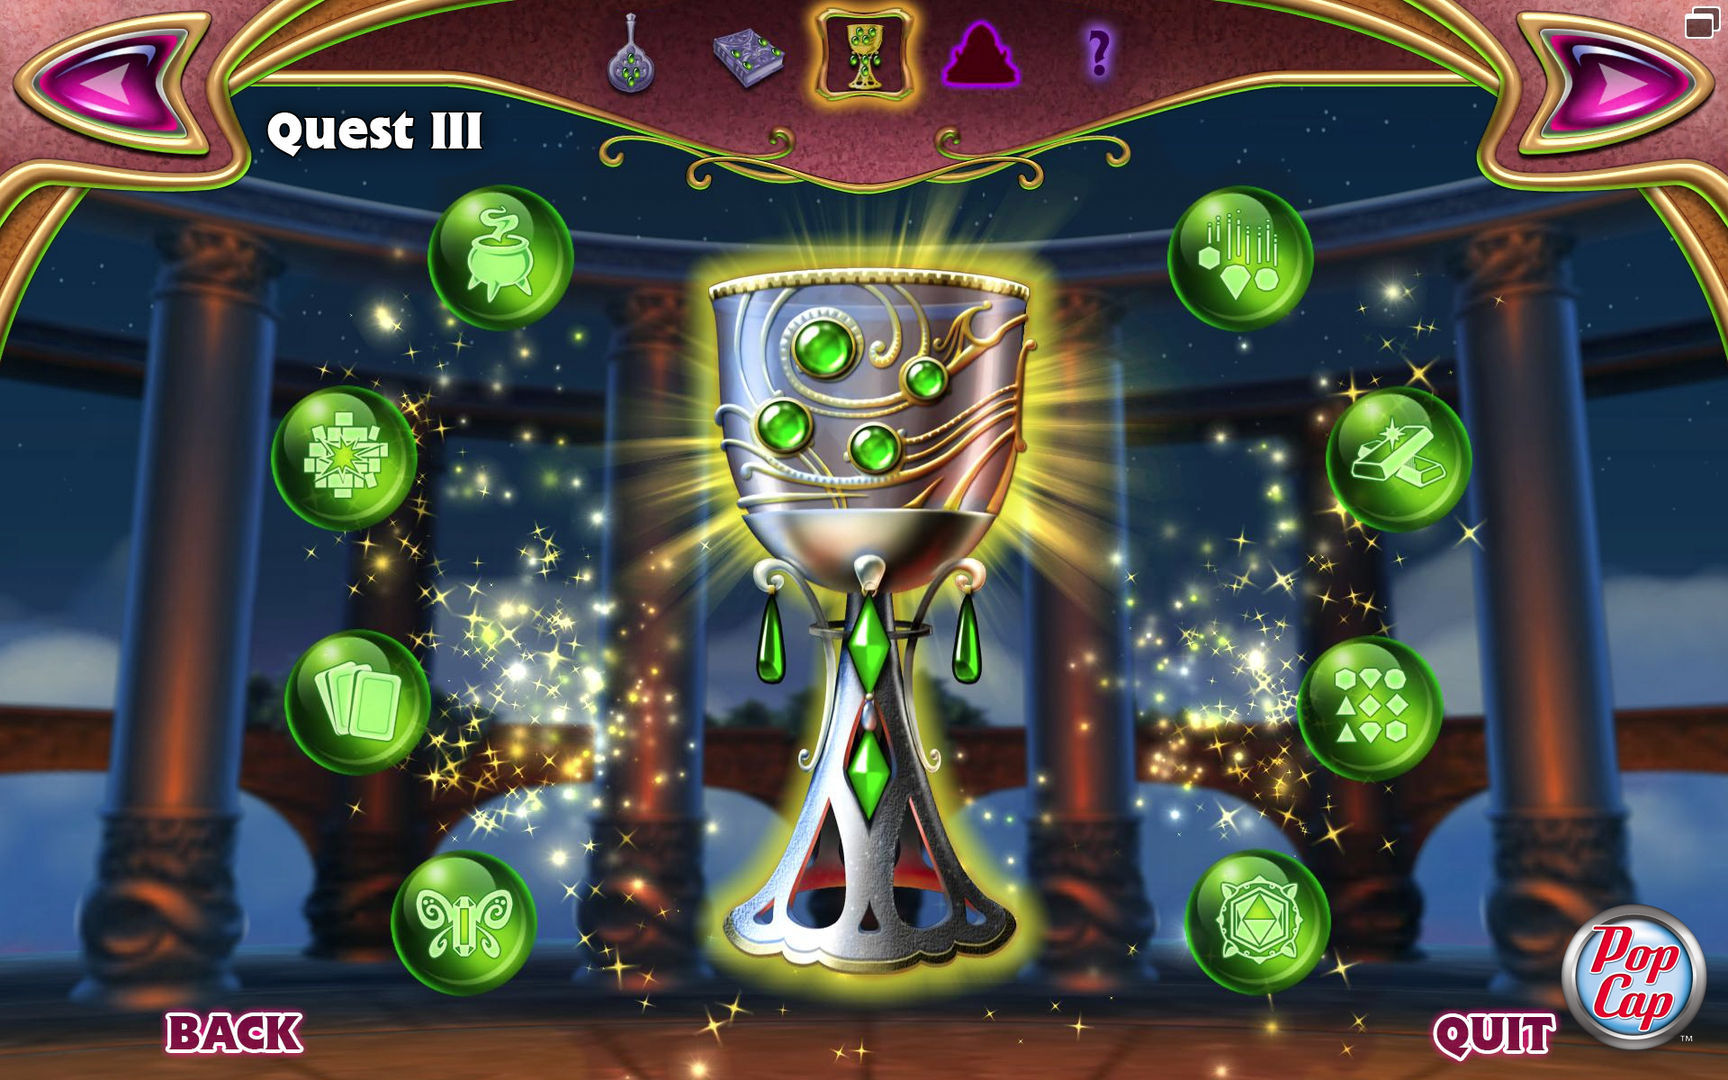 Free bejeweled classic game download